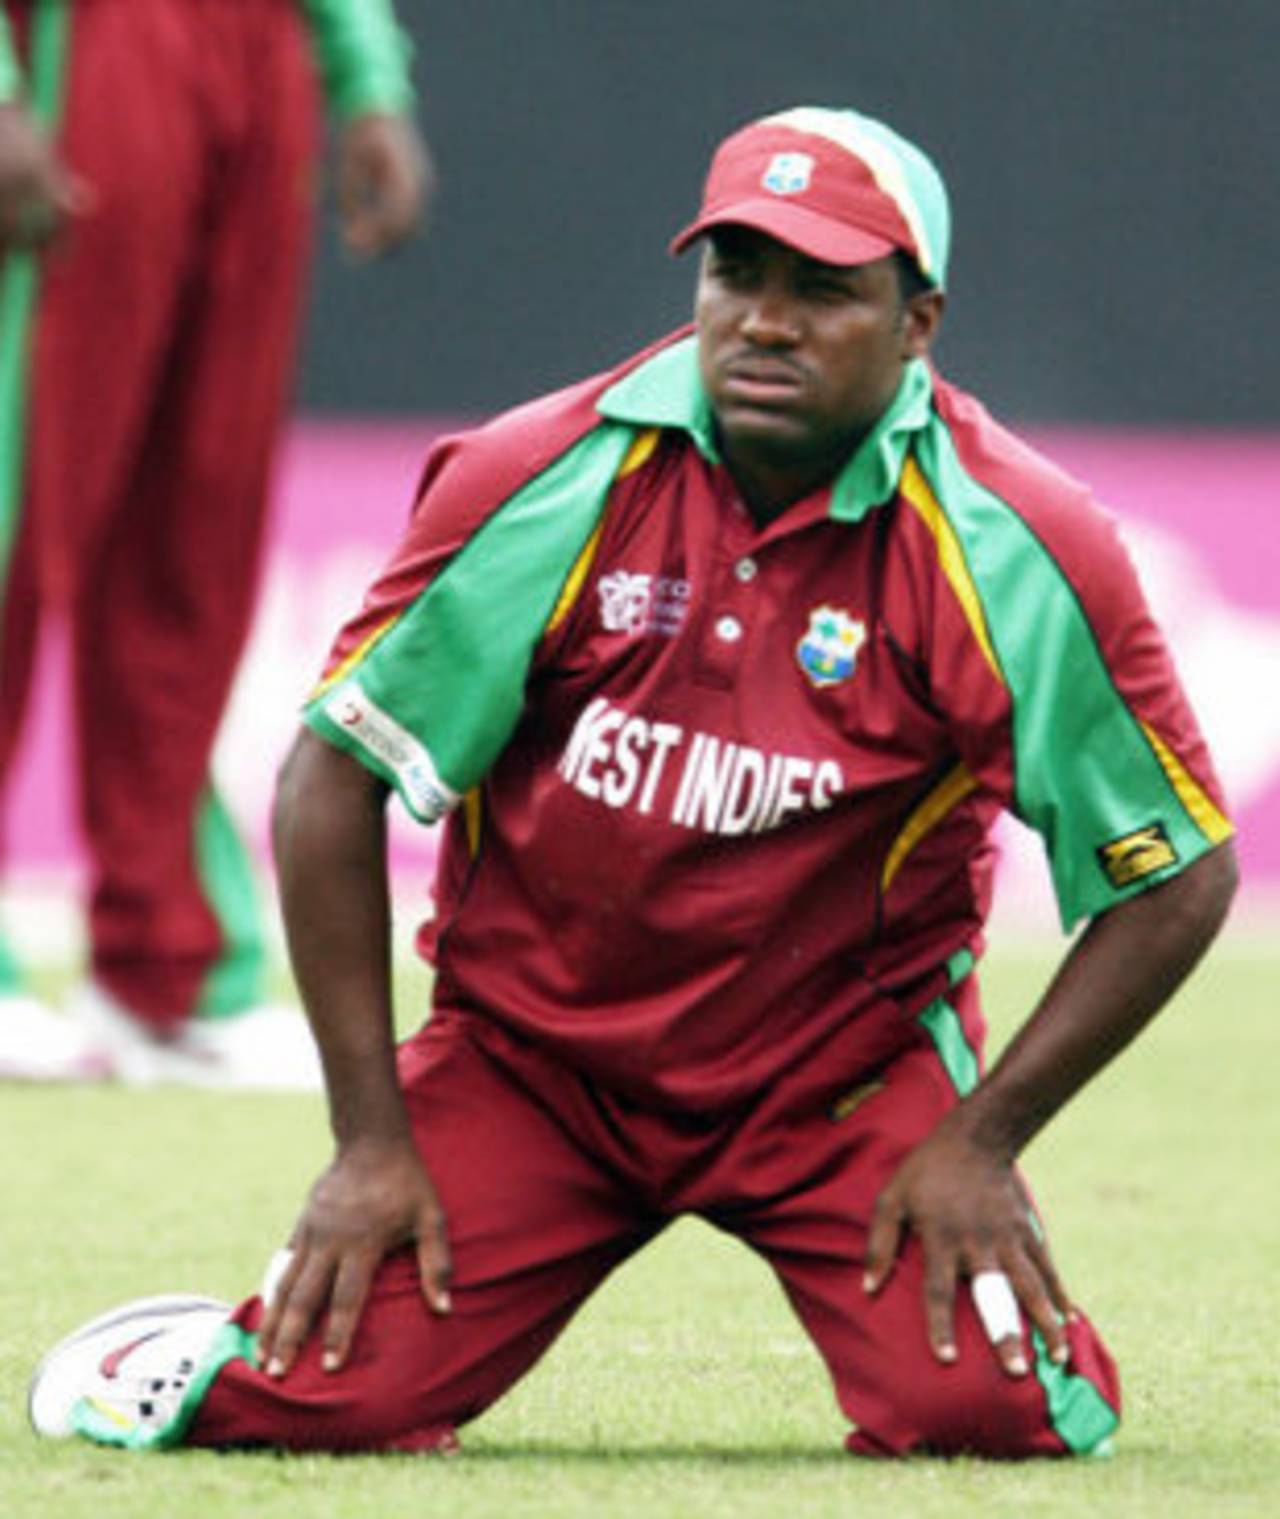 Brian Lara was weighed down by the pressures of leading a struggling team&nbsp;&nbsp;&bull;&nbsp;&nbsp;AFP